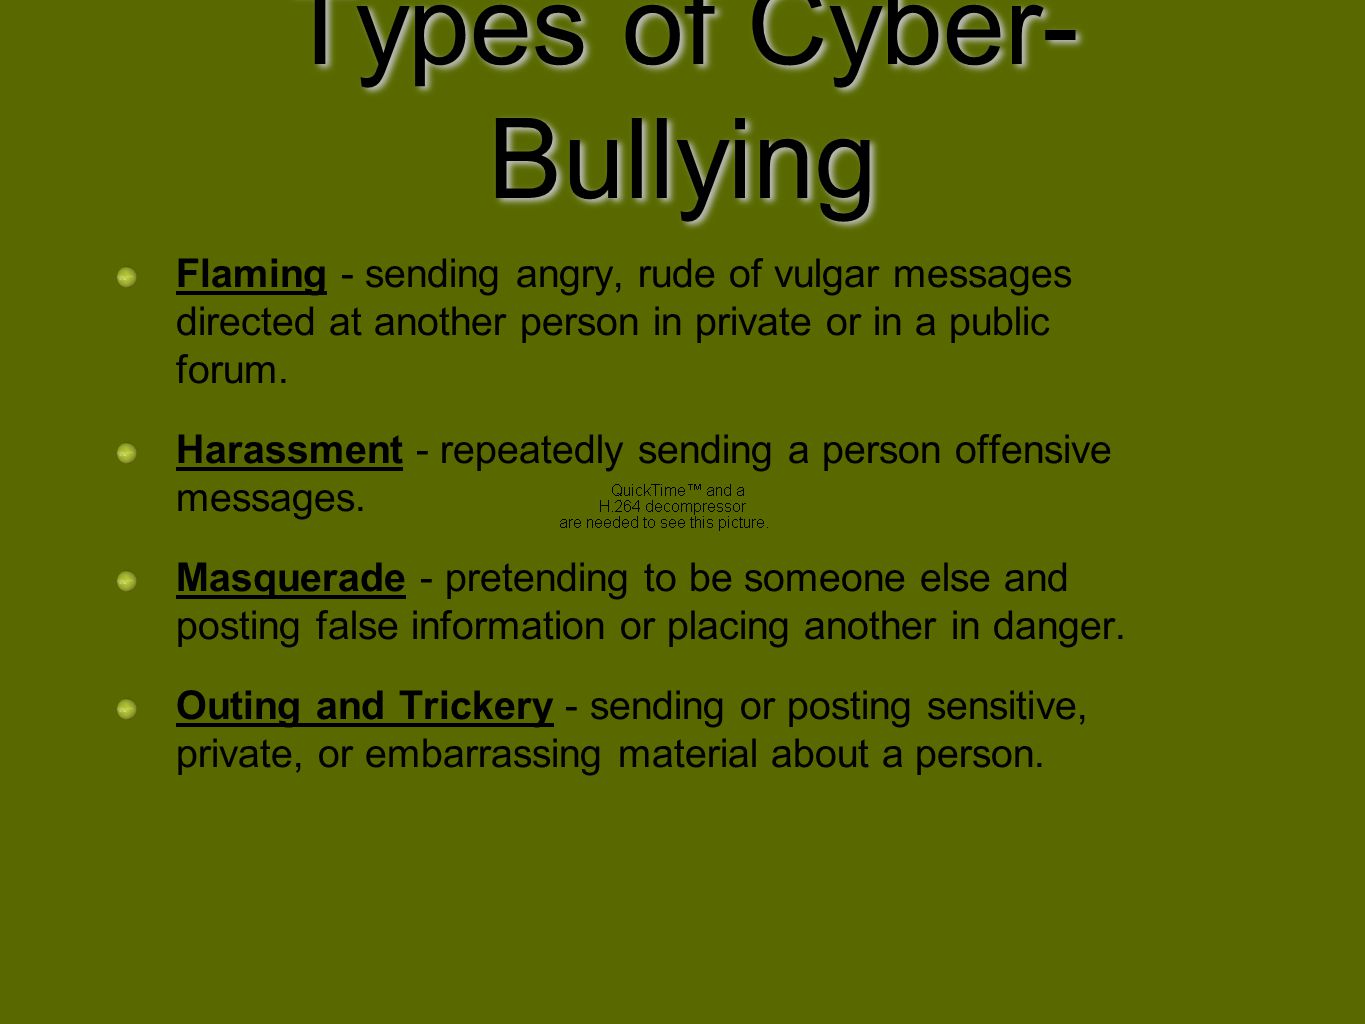 Types of Cyber-Bullying